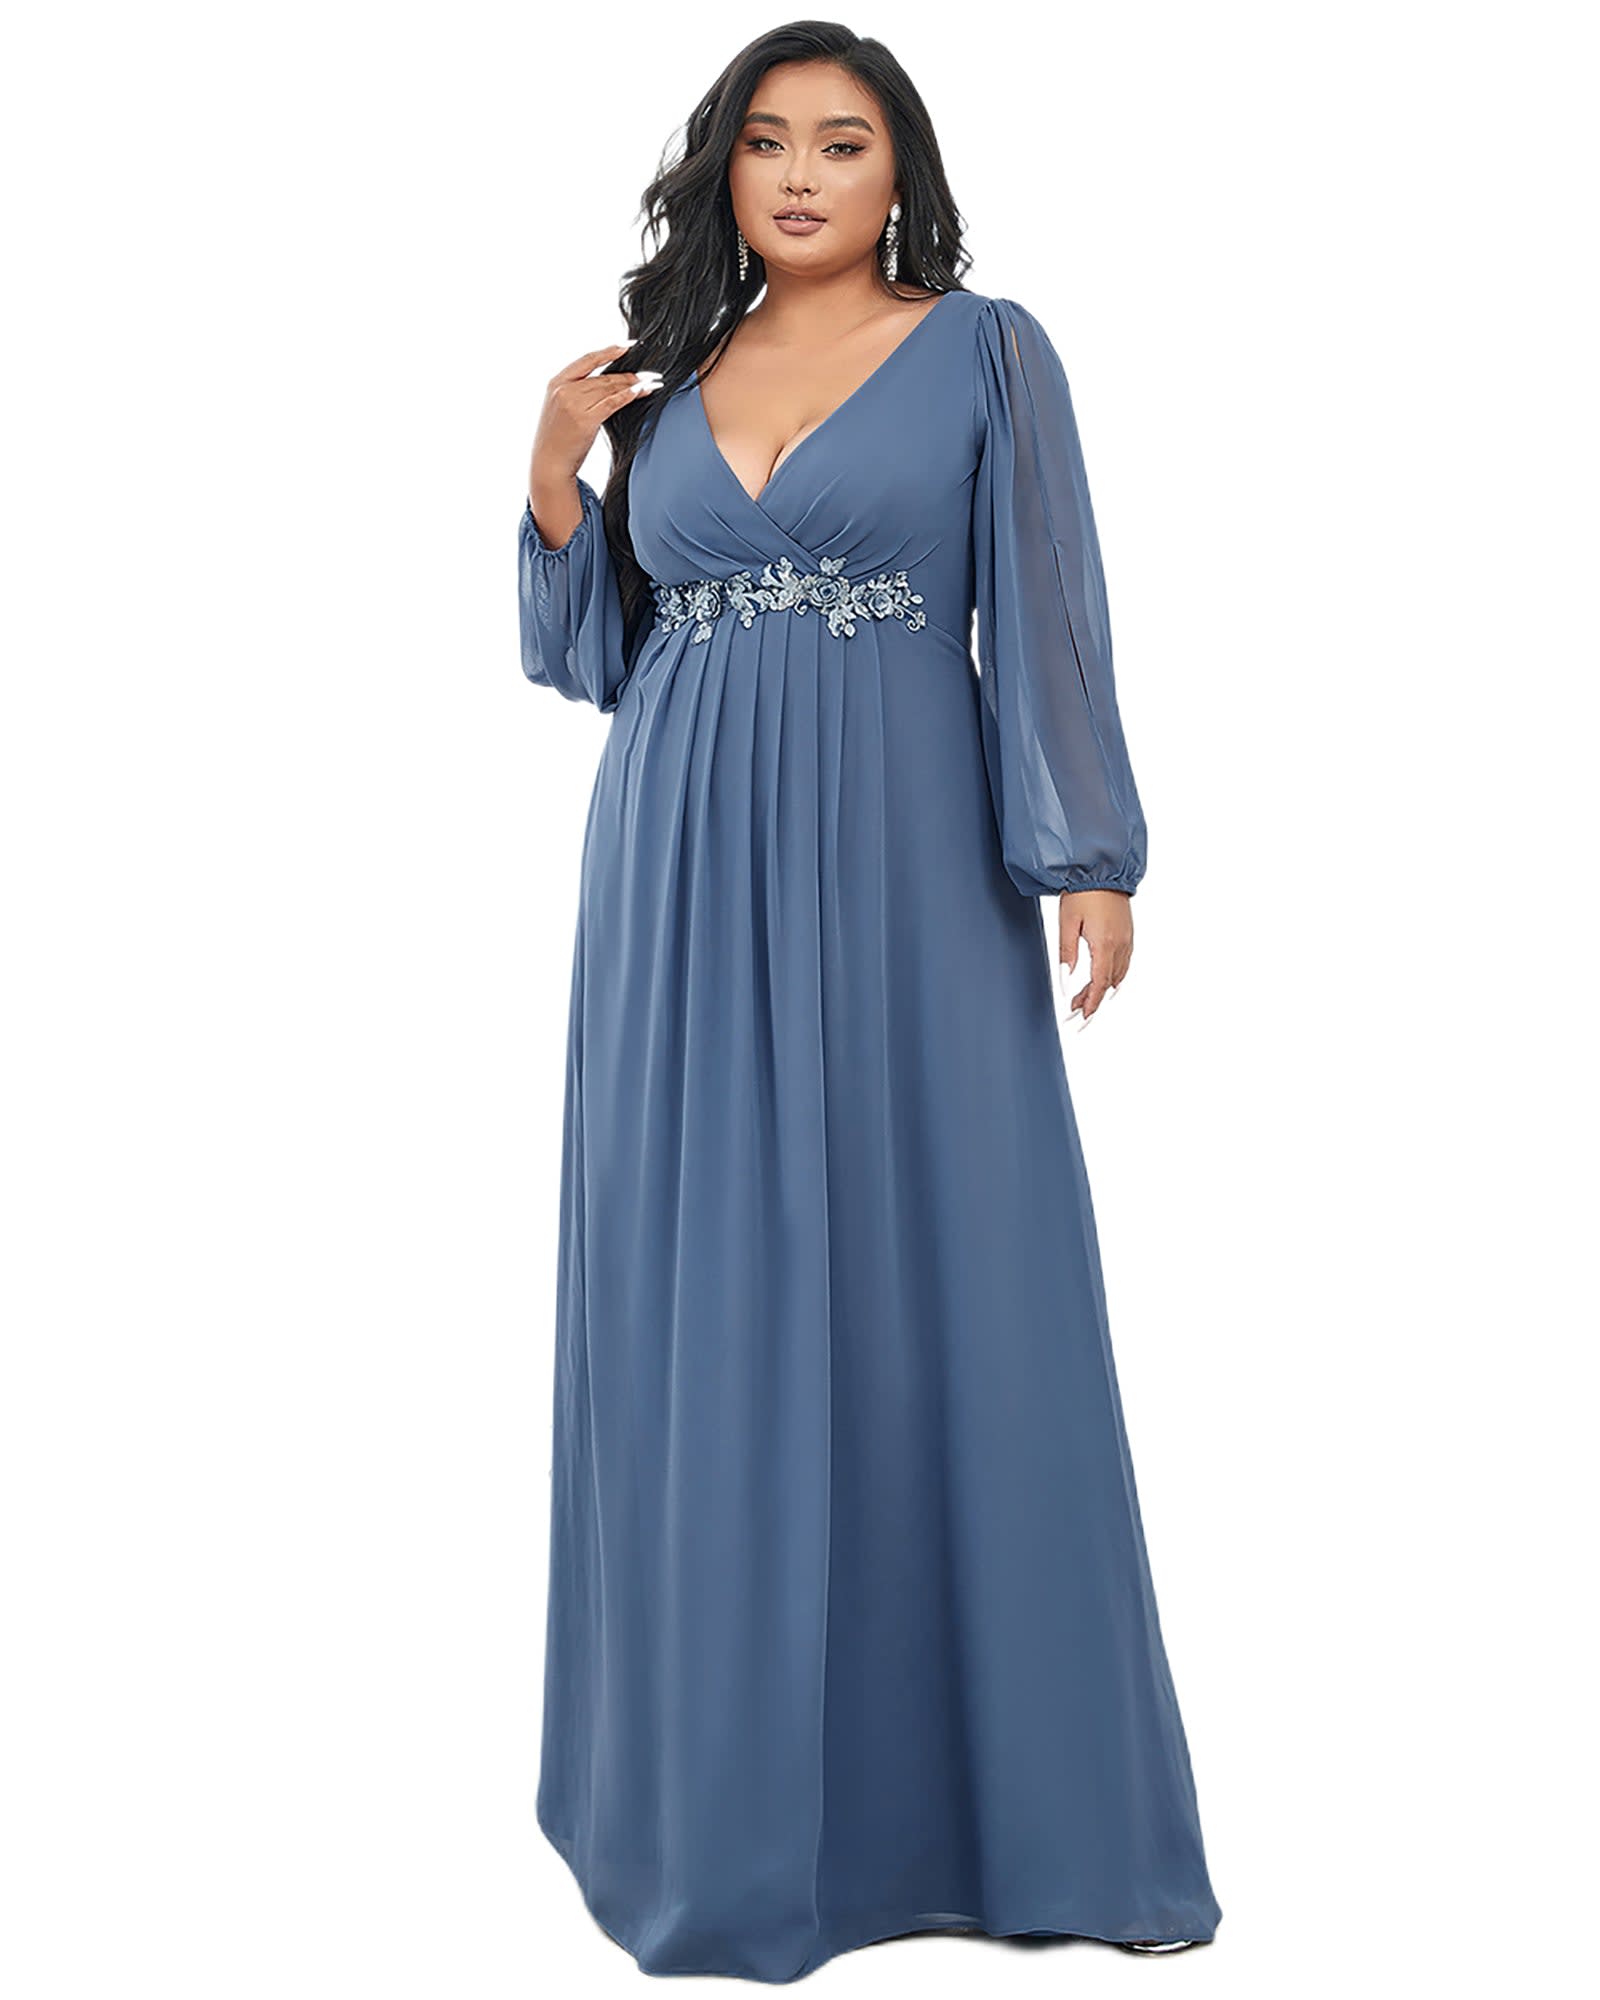 Dresses For Outdoor Wedding